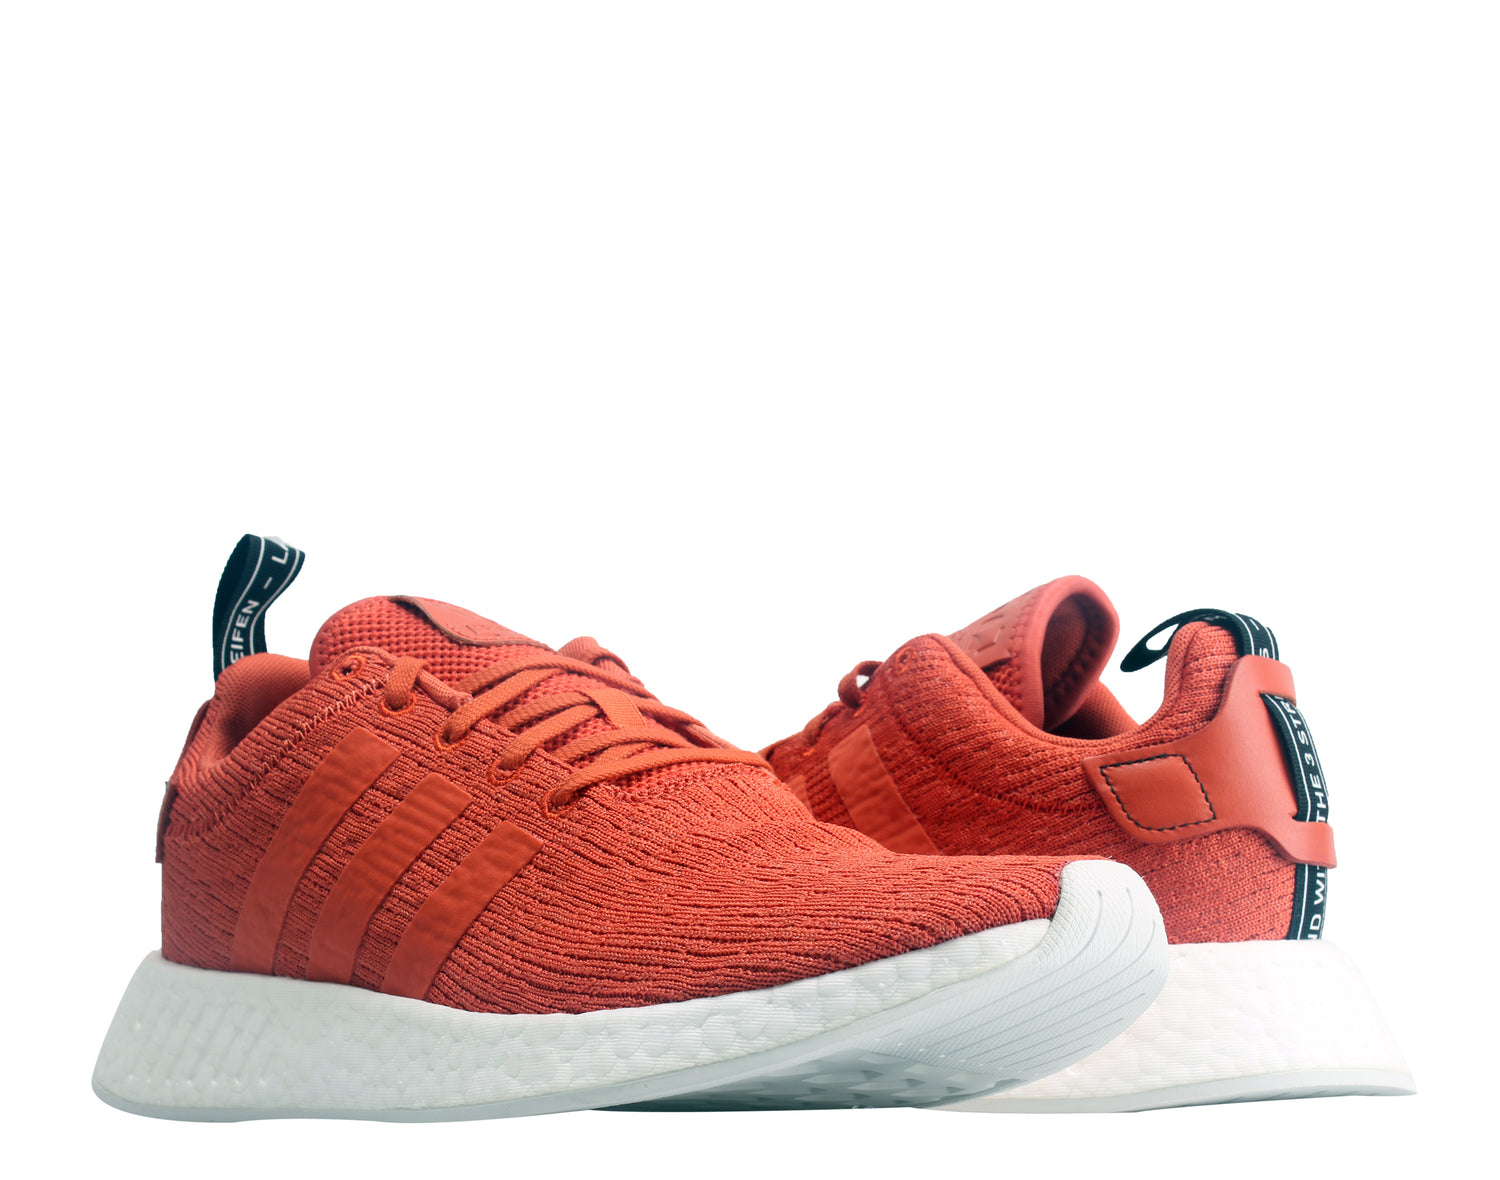 Adidas NMD_R2 Men's Running Shoes